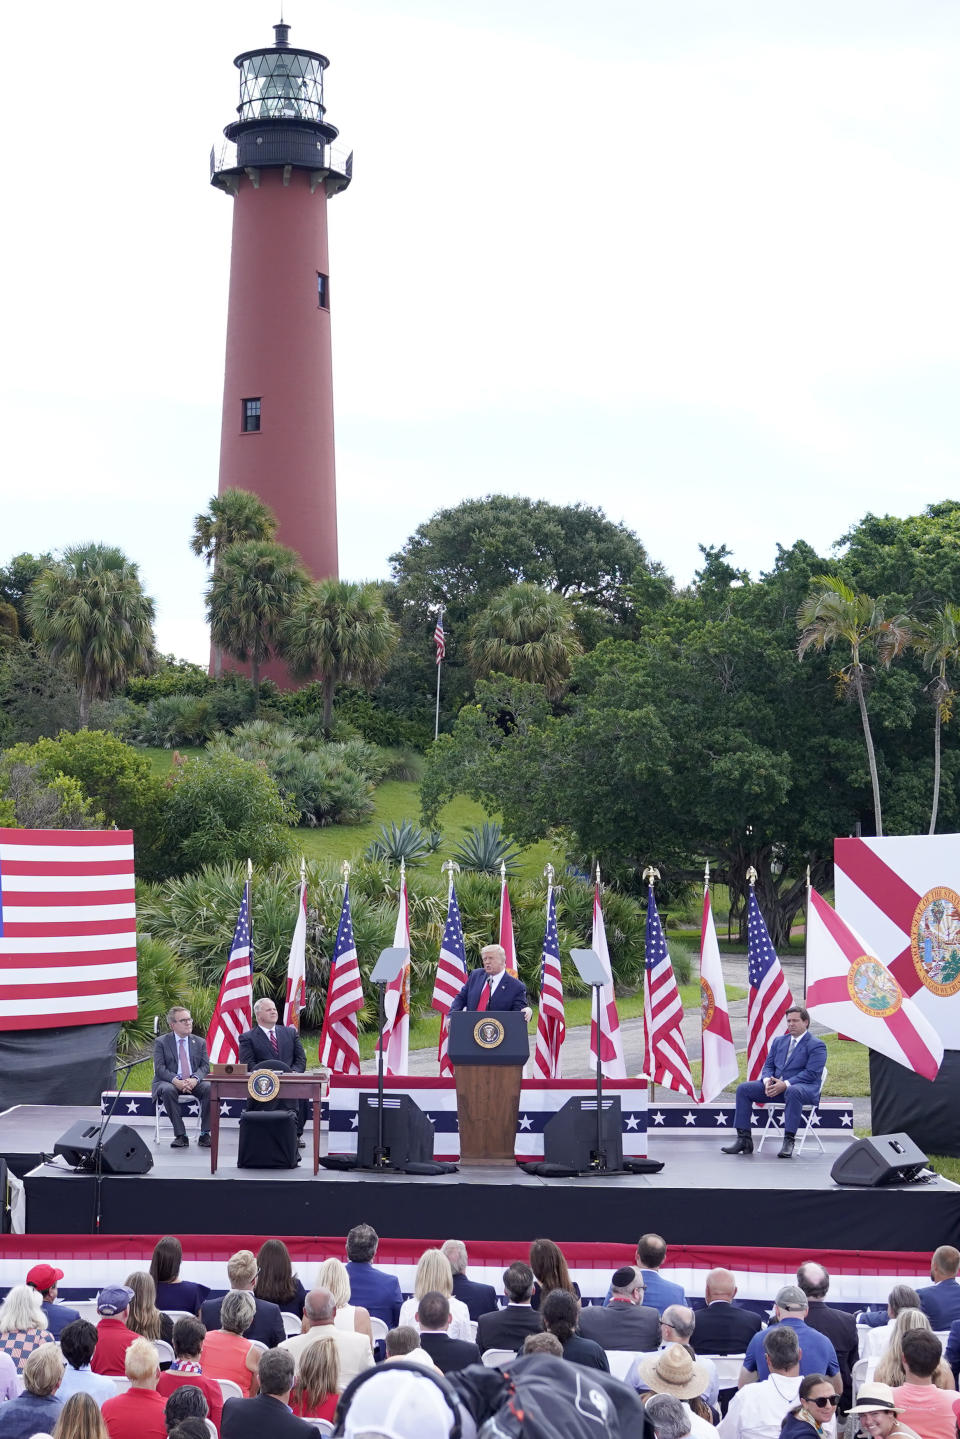 President Donald Trump, center, speaks during an event discussing environmental policies at the Jupiter Inlet Lighthouse and Museum Tuesday, Sept. 8, 2020, in Jupiter, Fla. (AP Photo/John Raoux)